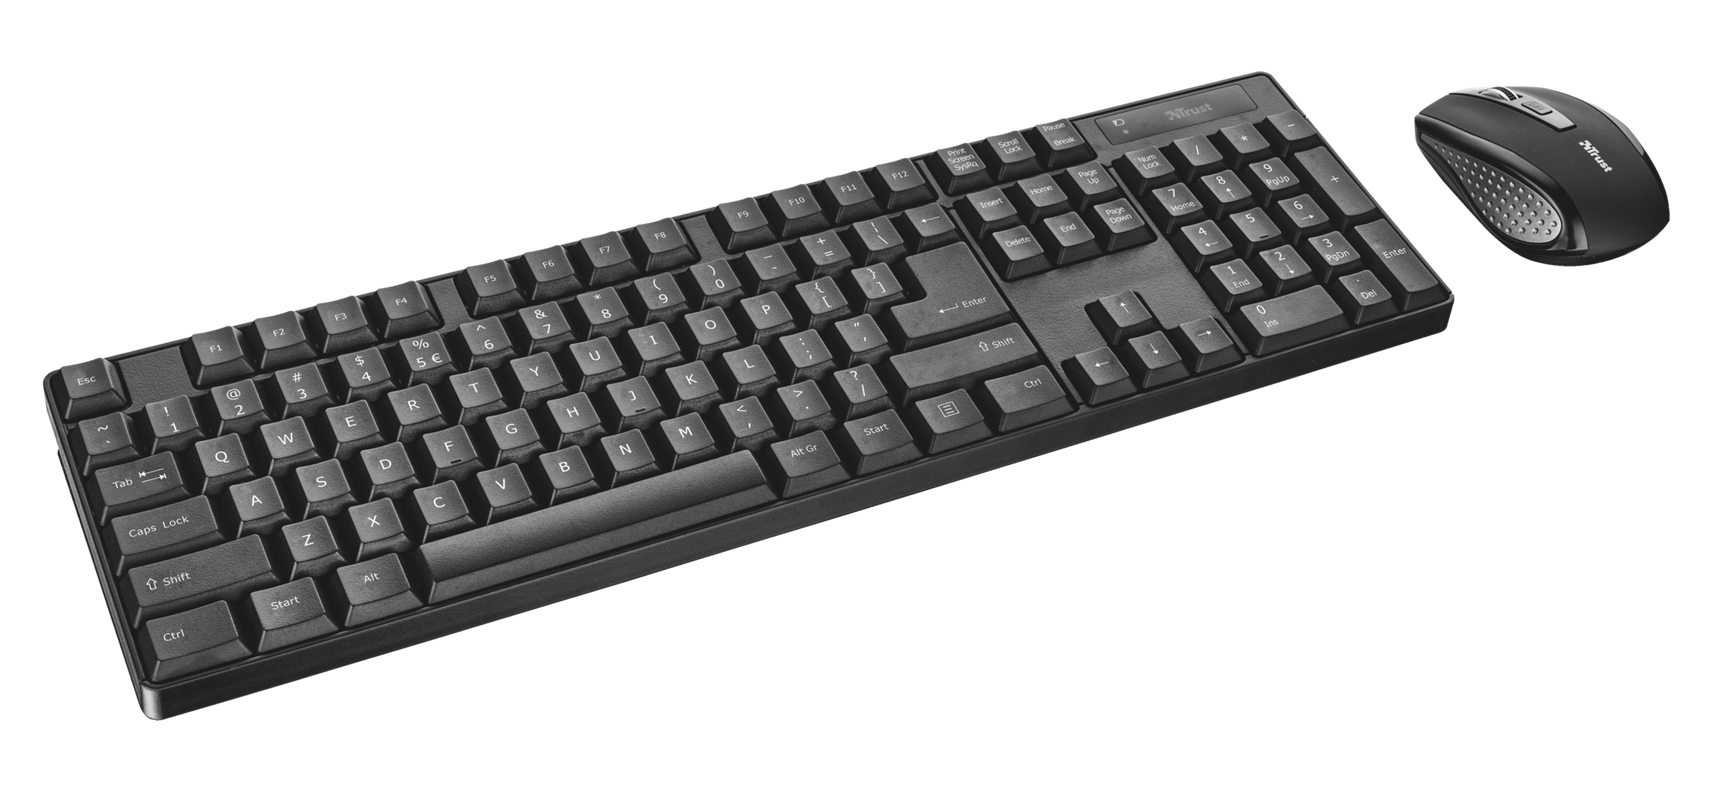 Ximo Wireless Keyboard with mouse-Visual